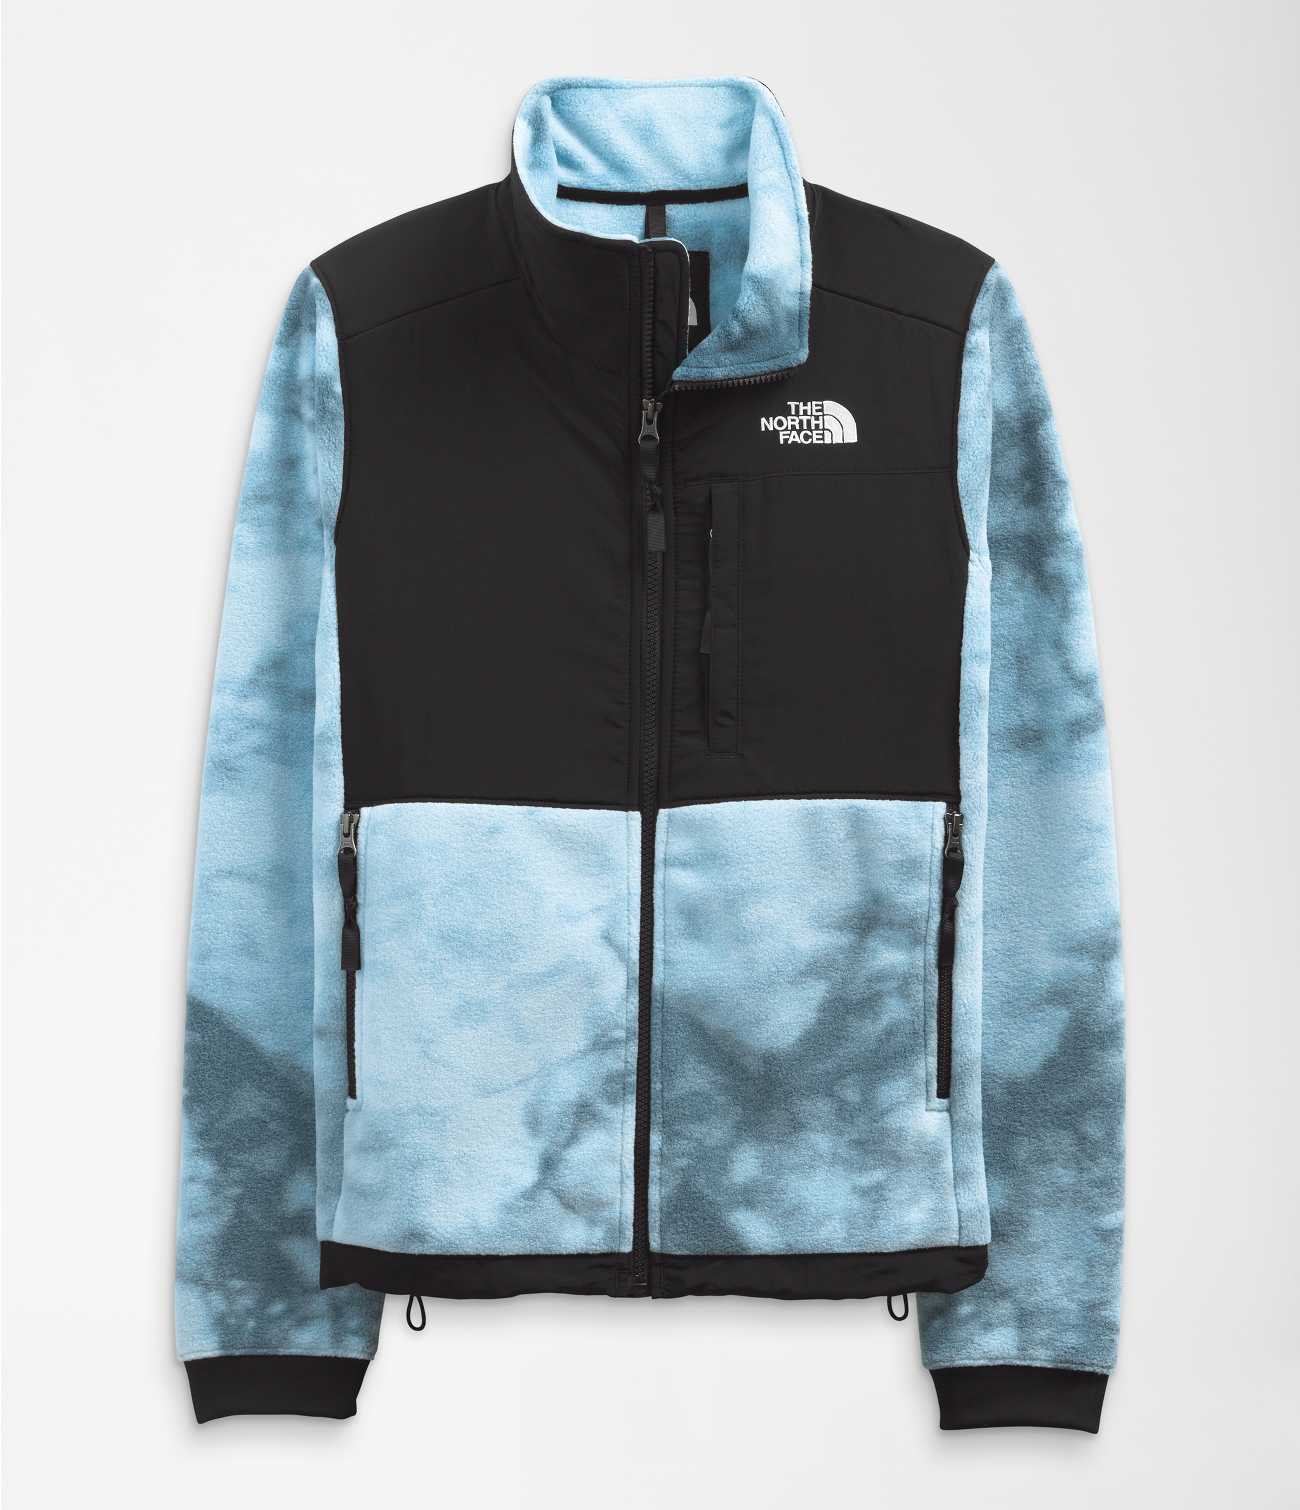 WOMEN'S PRINTED DENALI 2 JACKET | The North Face | The North Face 